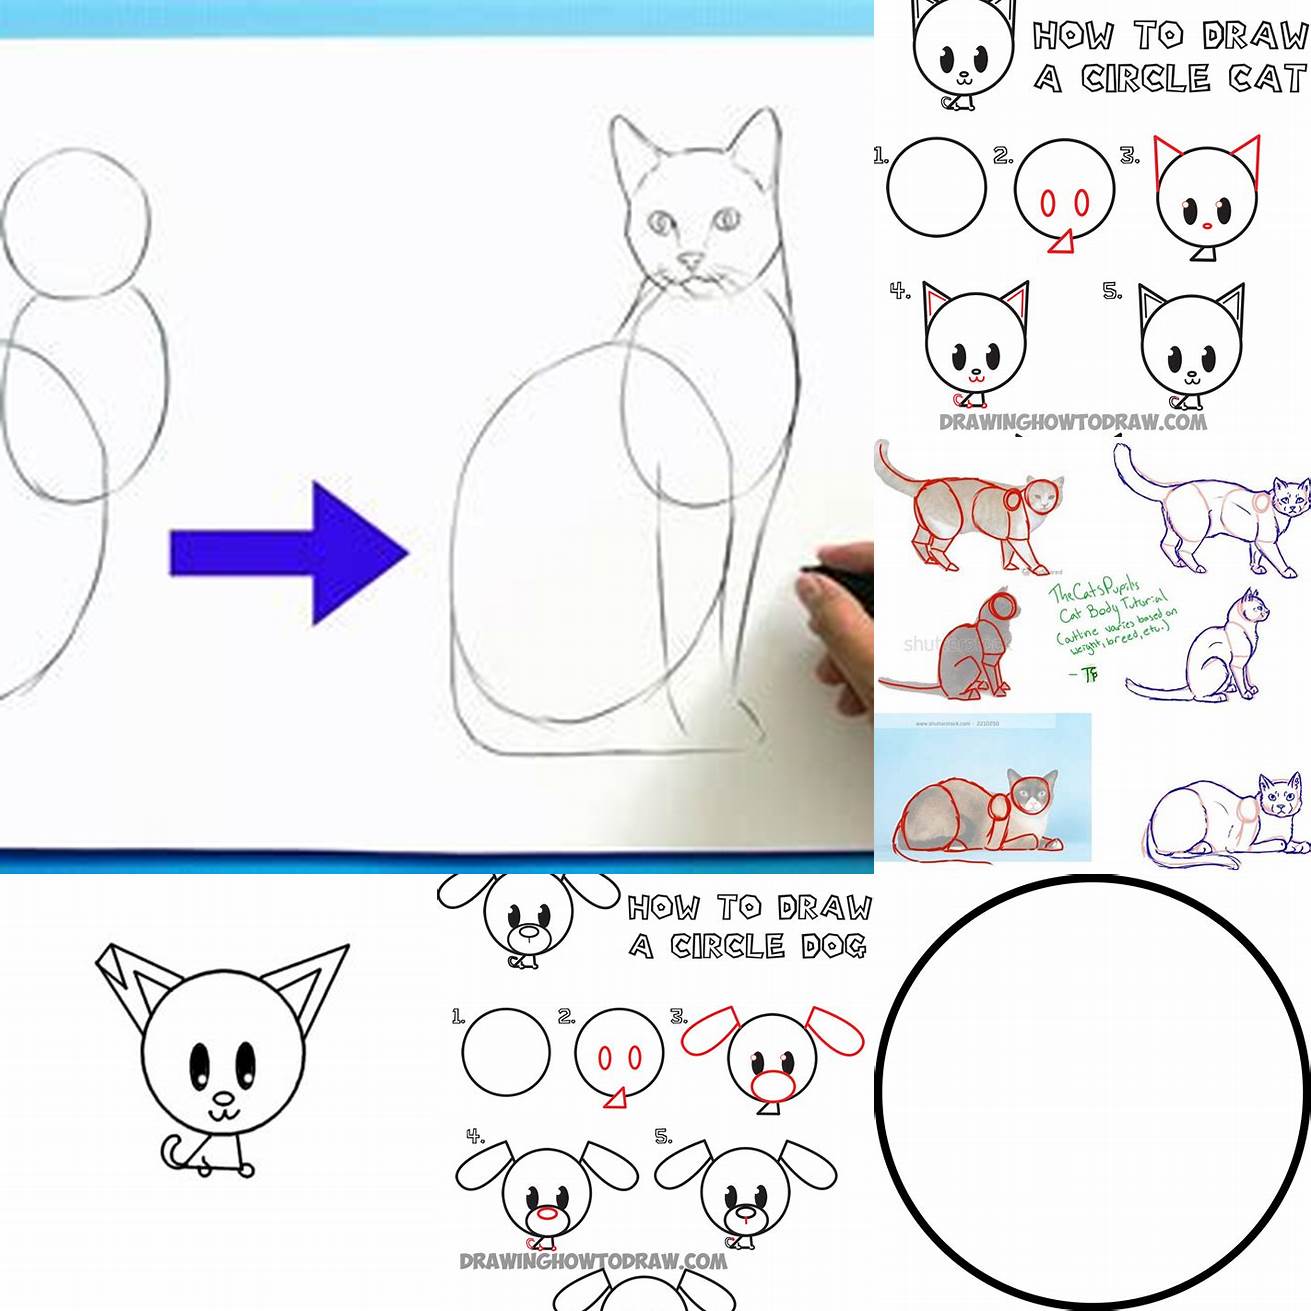 Step 1 Draw a large circle for the head and a smaller circle for the body